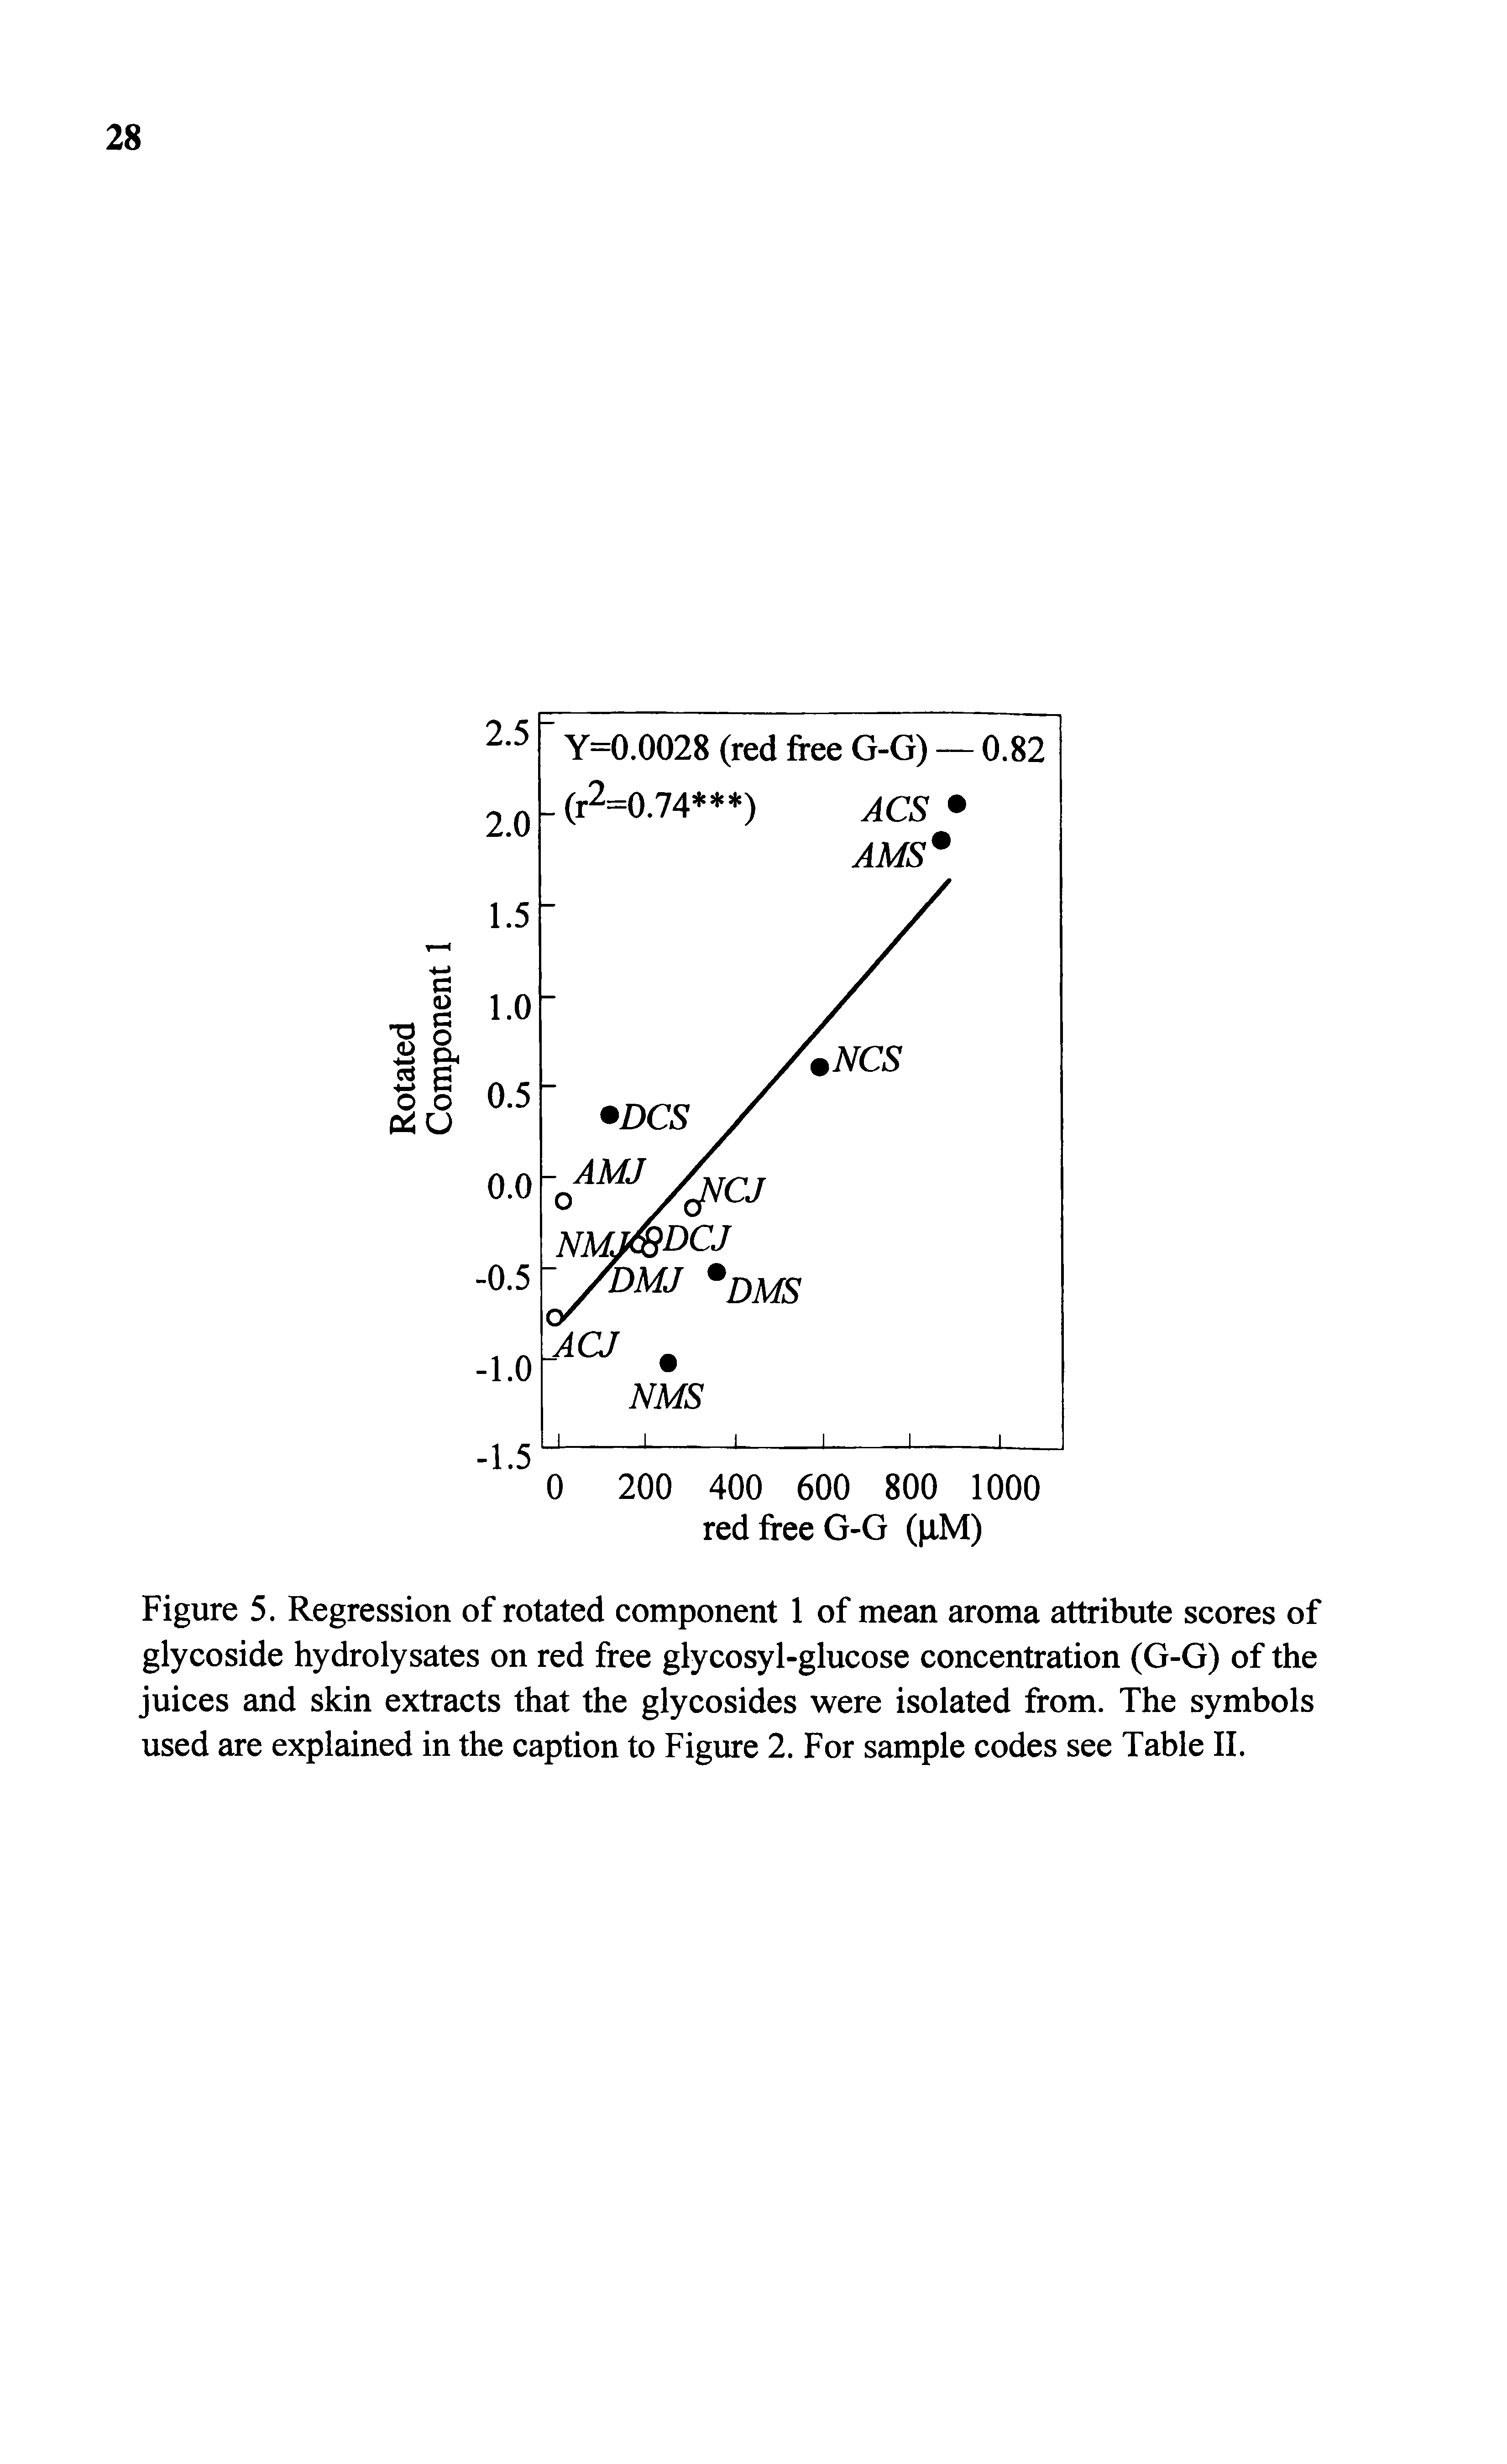 Figure 5. Regression of rotated component 1 of mean aroma attribute scores of glycoside hydrolysates on red free glycosyl-glucose concentration (G-G) of the juices and skin extracts that the glycosides were isolated from. The symbols used are explained in the caption to Figure 2. For sample codes see Table II.